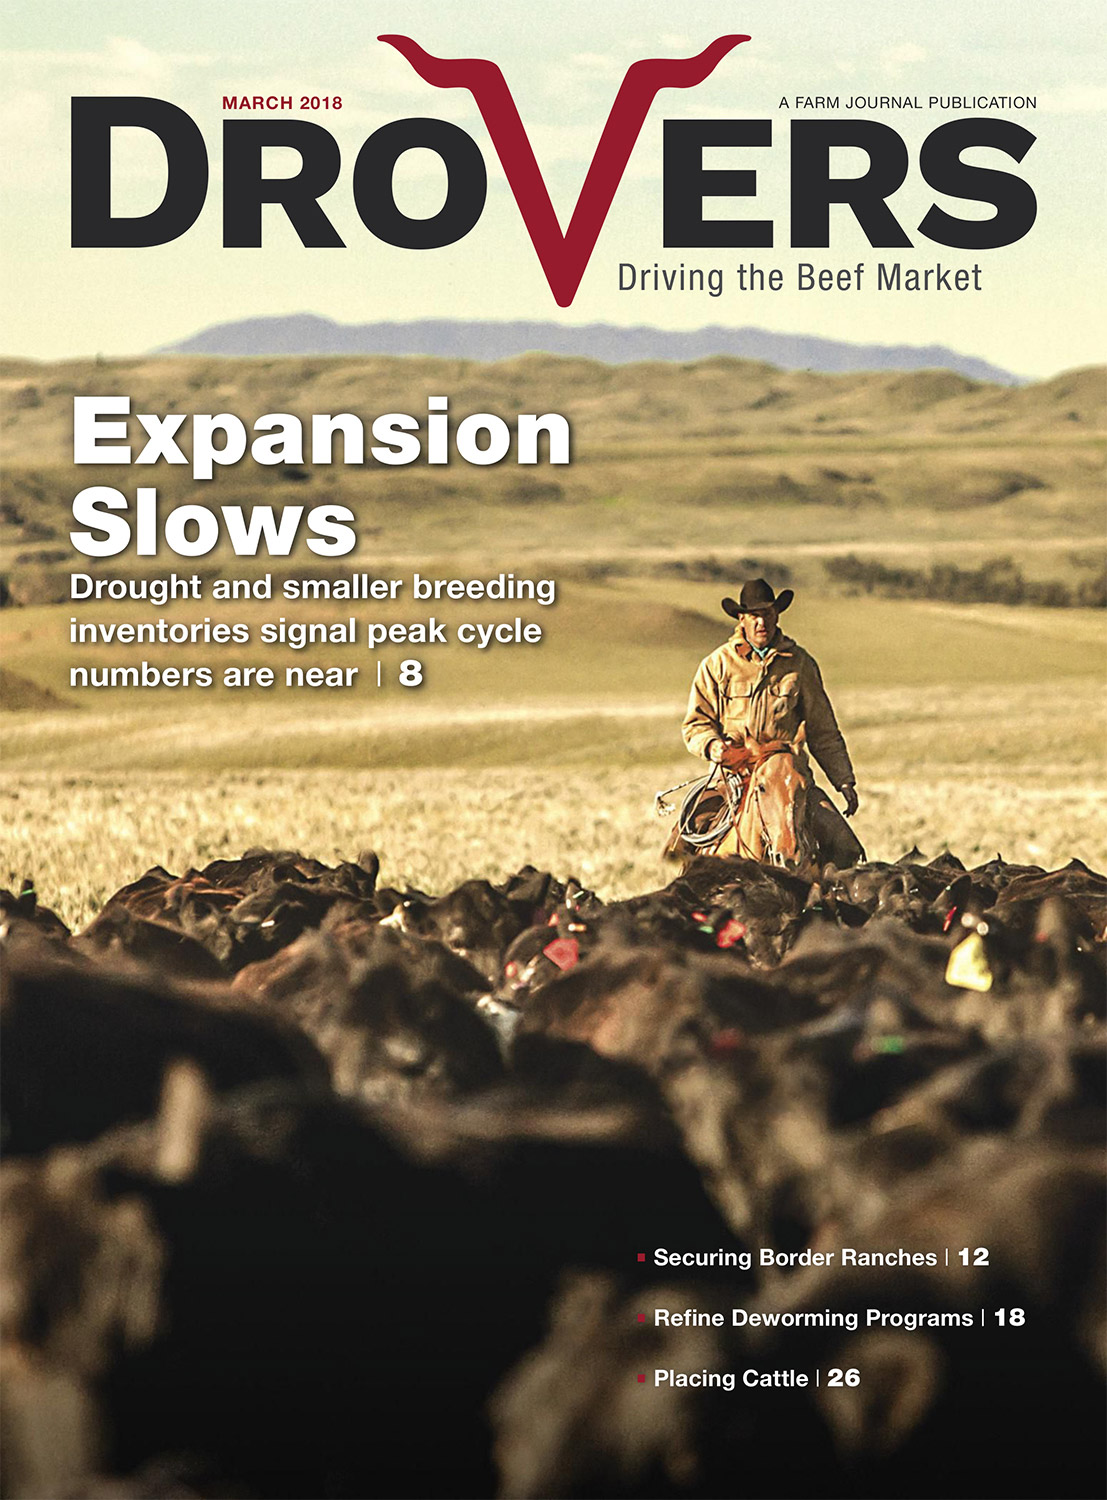 Photo of rancher appears on cover of March 2018 Drovers Magazine